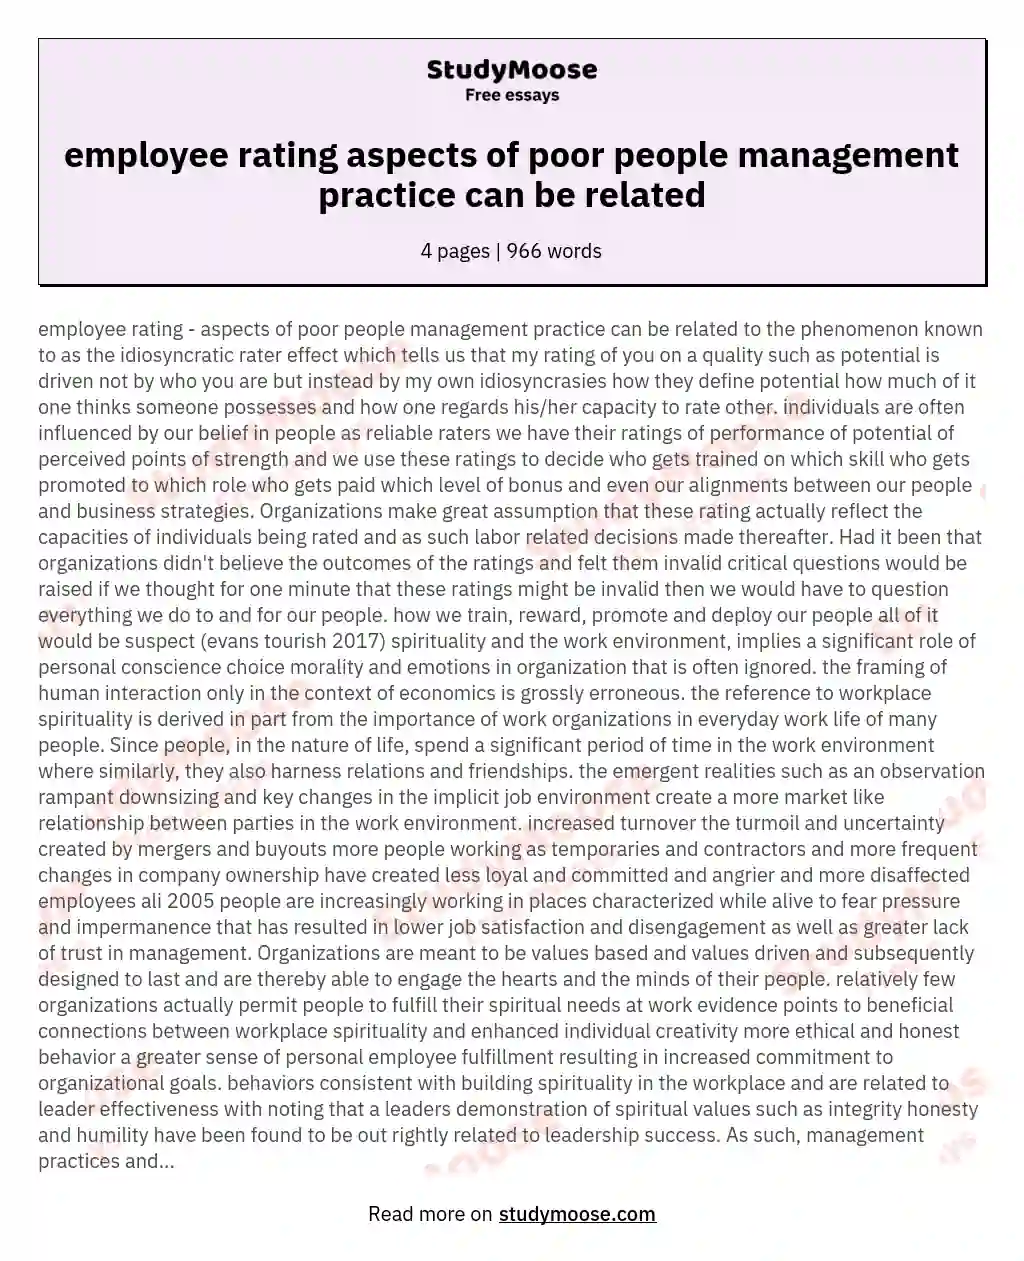 employee rating aspects of poor people management practice can be related essay